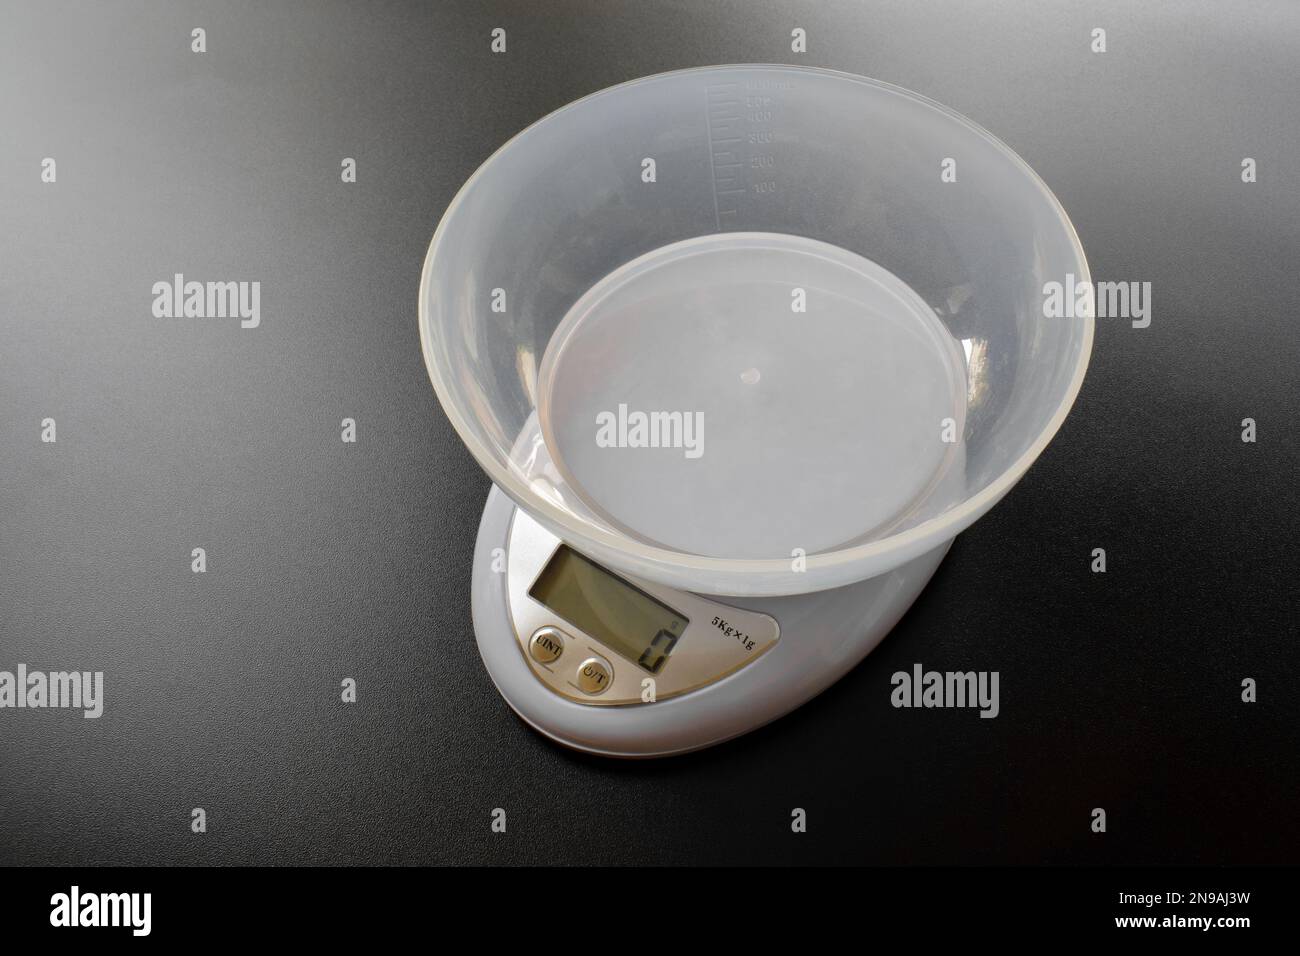 Digital kitchen scales isolated on black background. (Electronic Scales) Stock Photo